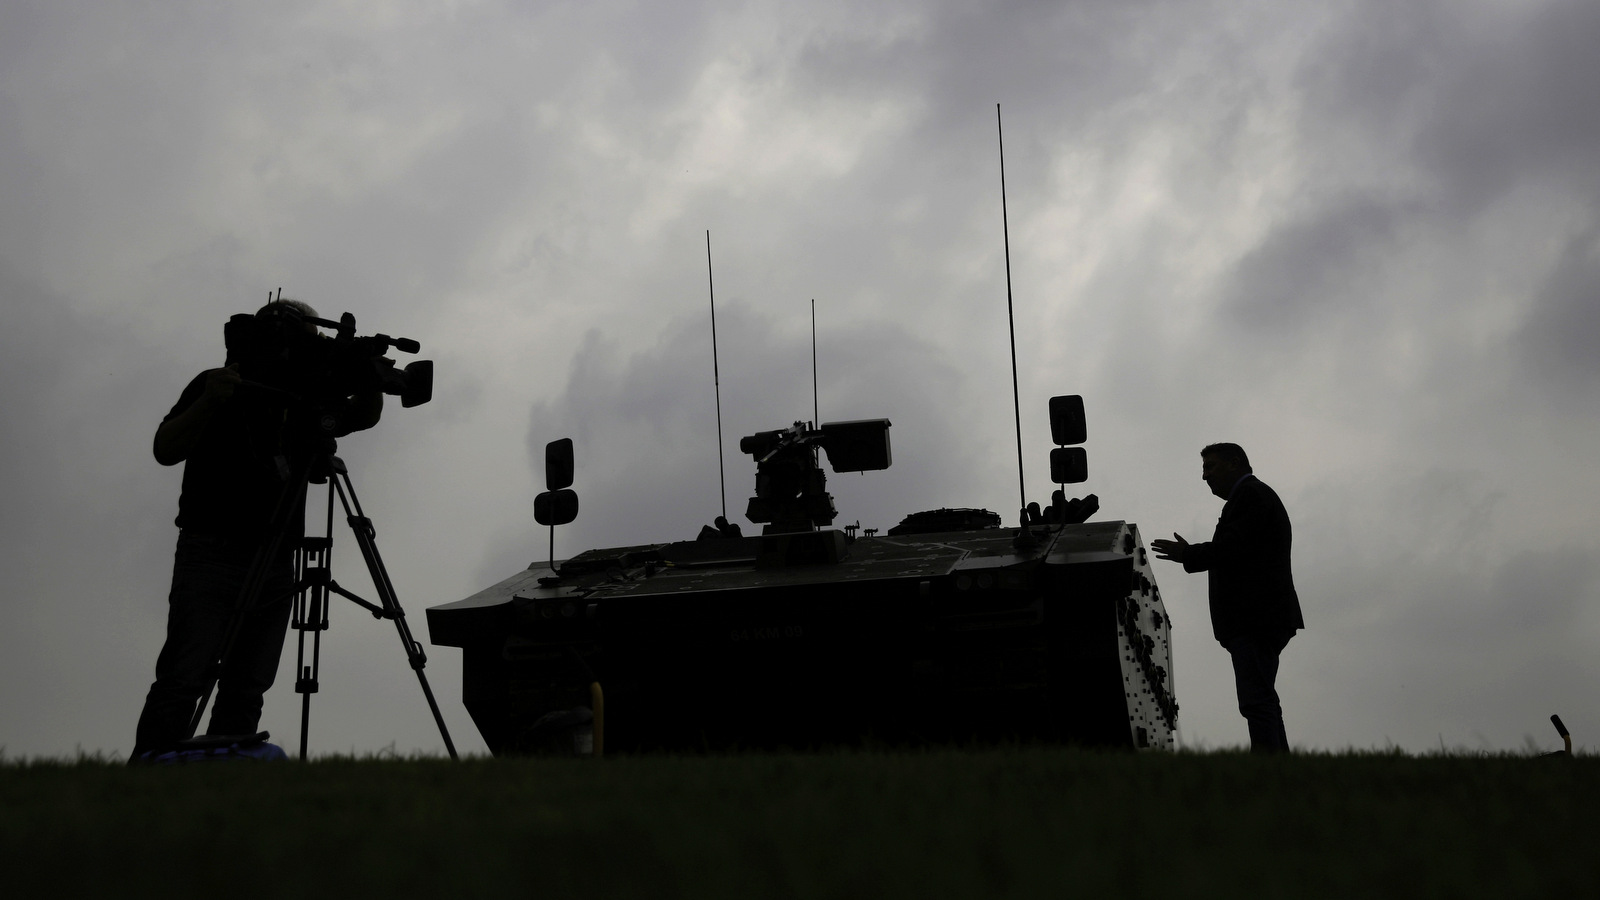 A journalist is silhouetted as he speaks to a cameraman beside a British military armored vehicle at a NATO summit in Newport, Wales. (AP/Matt Dunham)